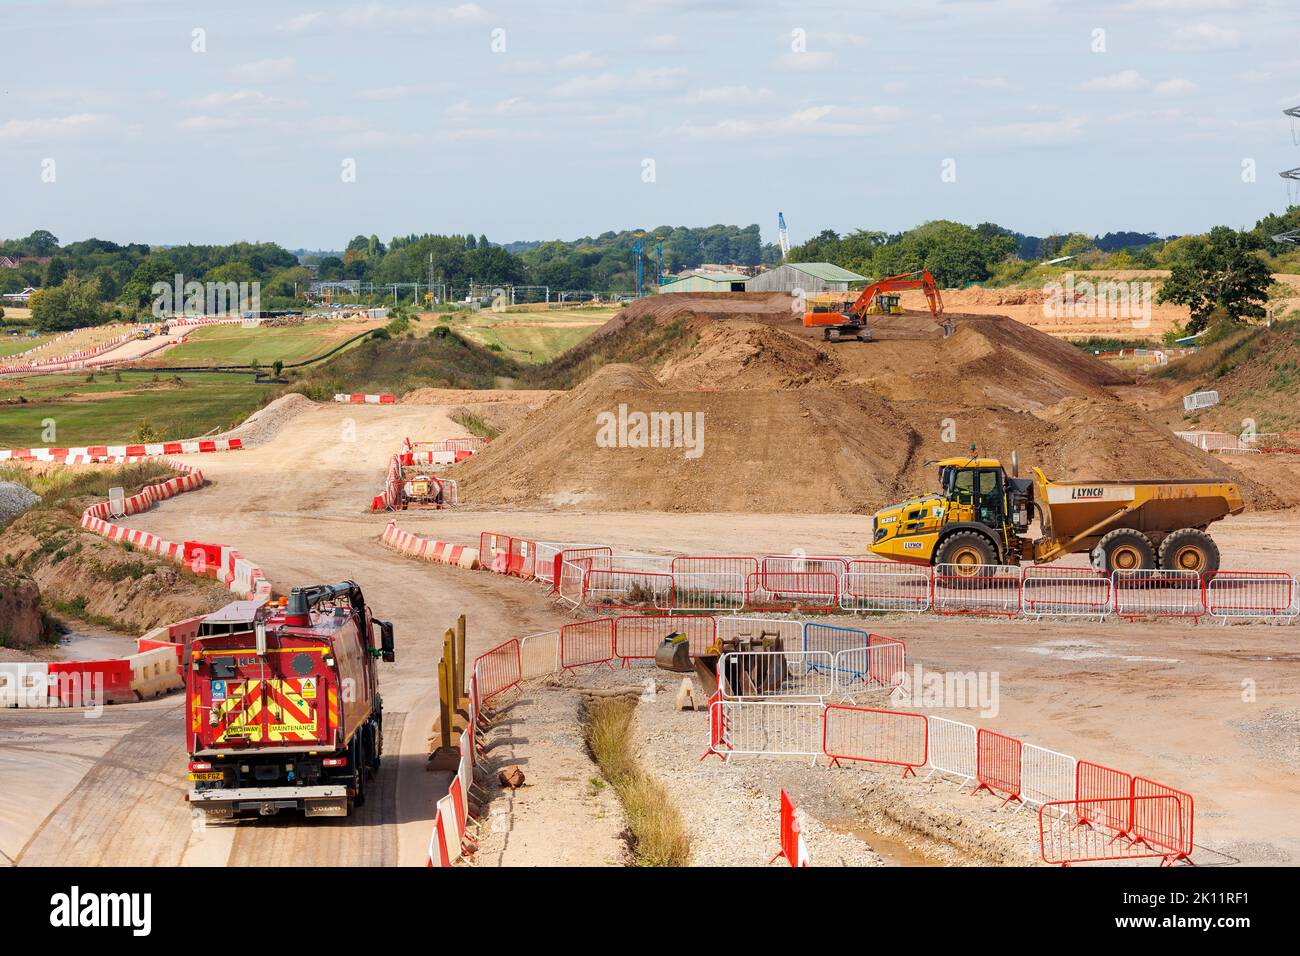 Construction of the HS2 Rail network taking place at Waste Lane near Berkswell, Warwickshire. The view is of construction work looking towards Berkswell, picture taken from Waste Lane bridge. Stock Photo